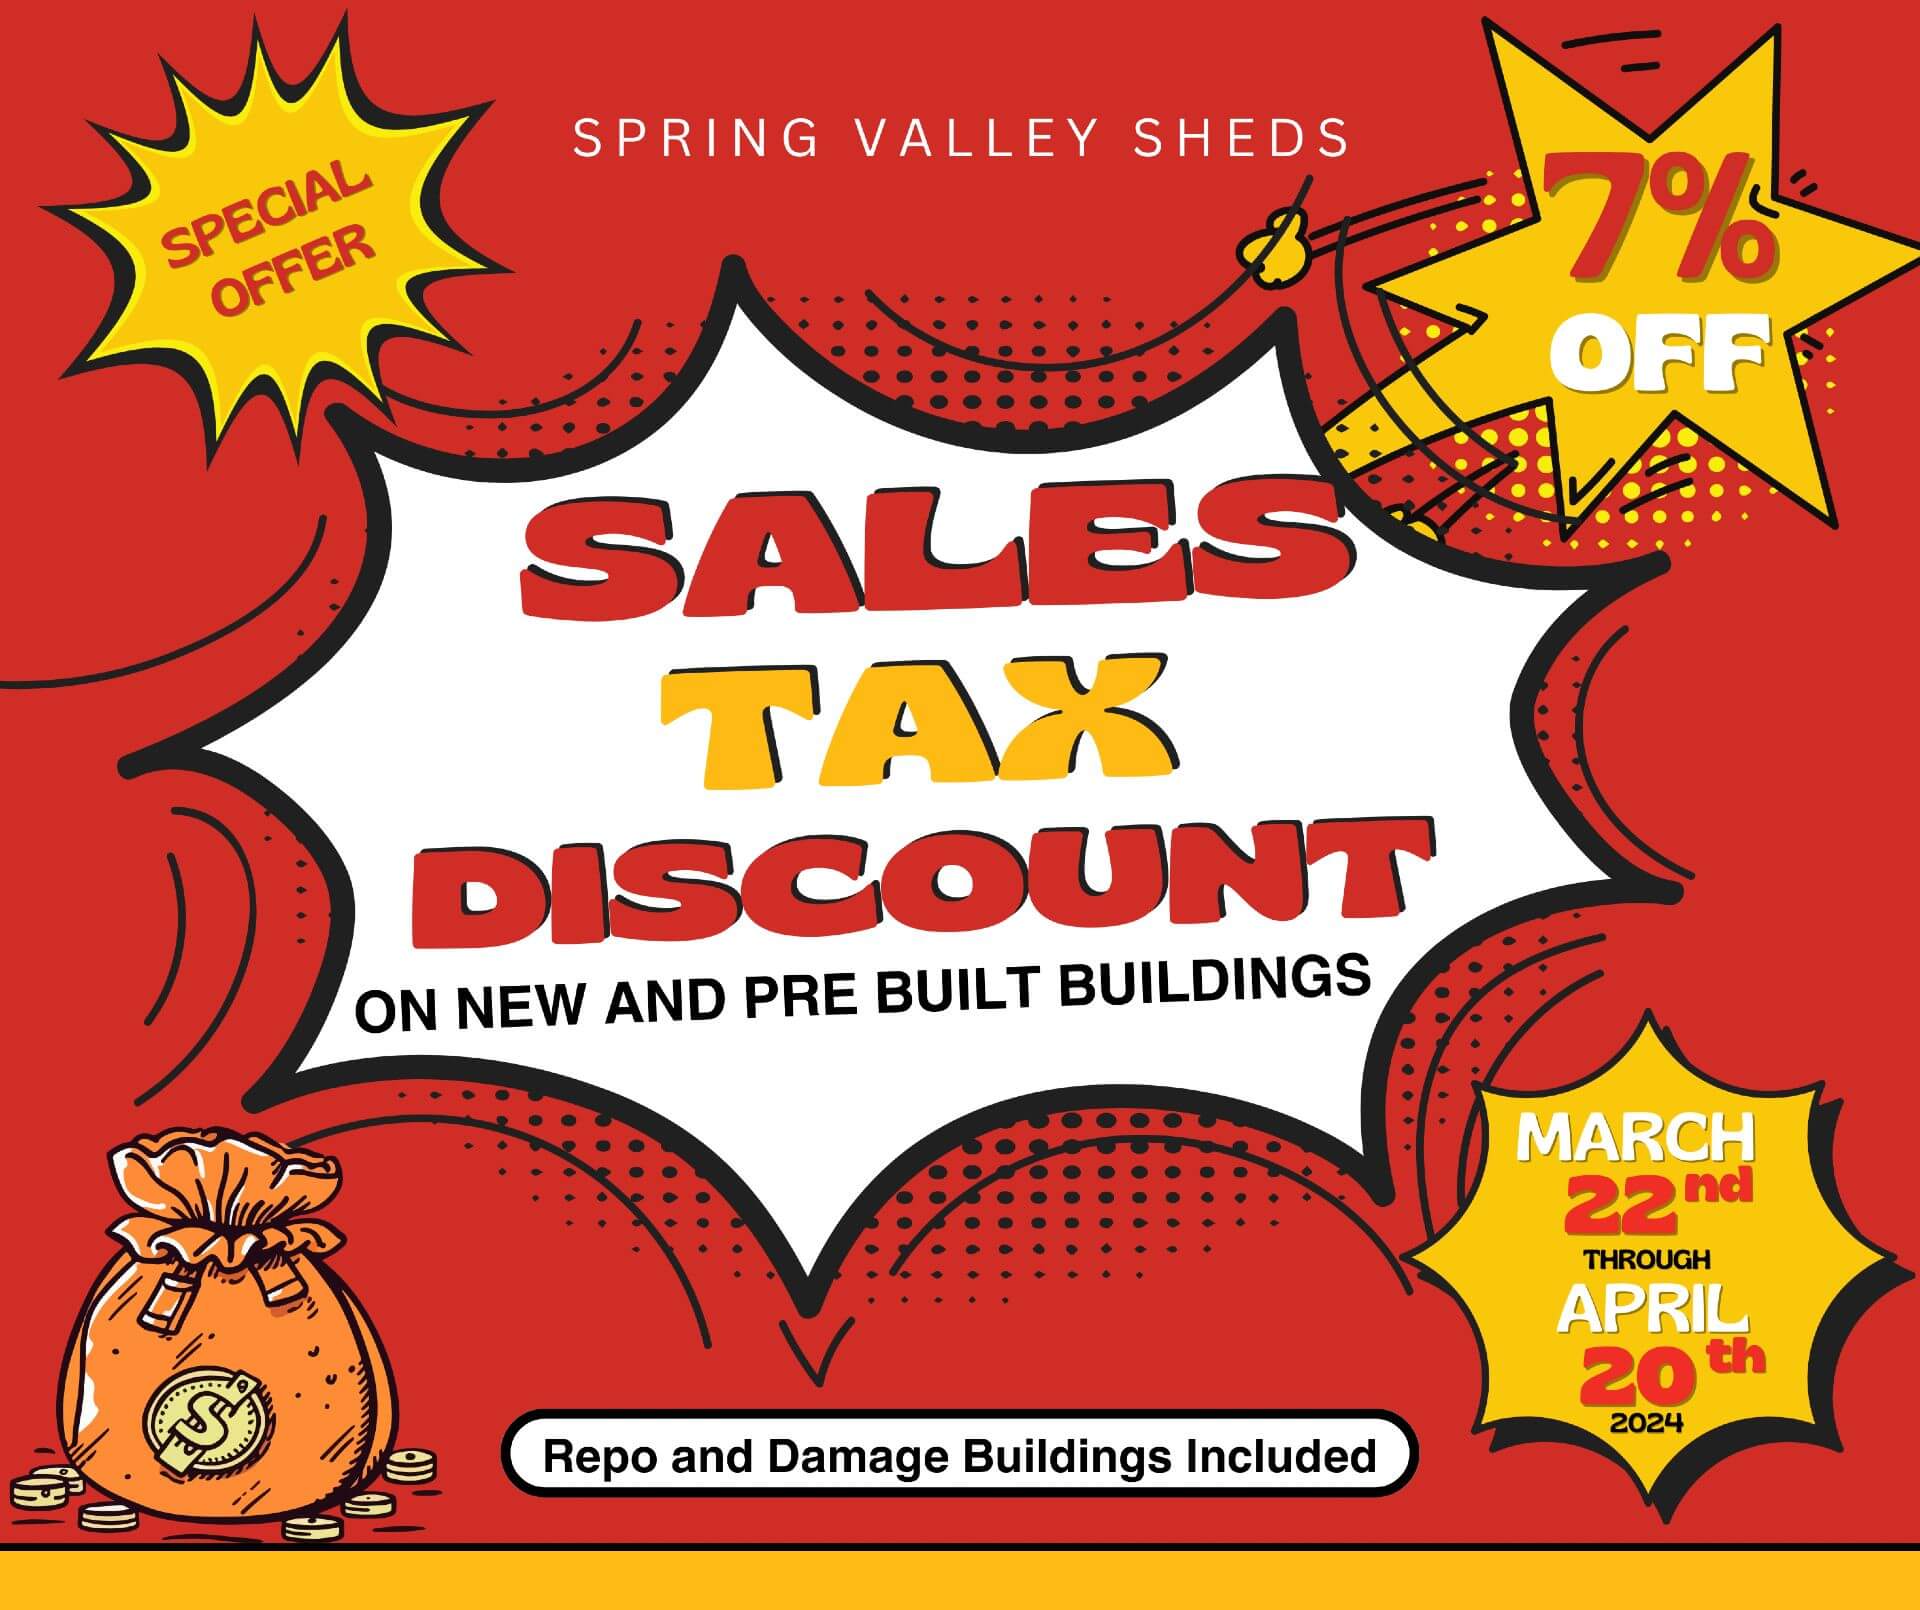 Martin's Mini Barns Iowa Spring Valley Sheds March 2024 Sales Tax Discount